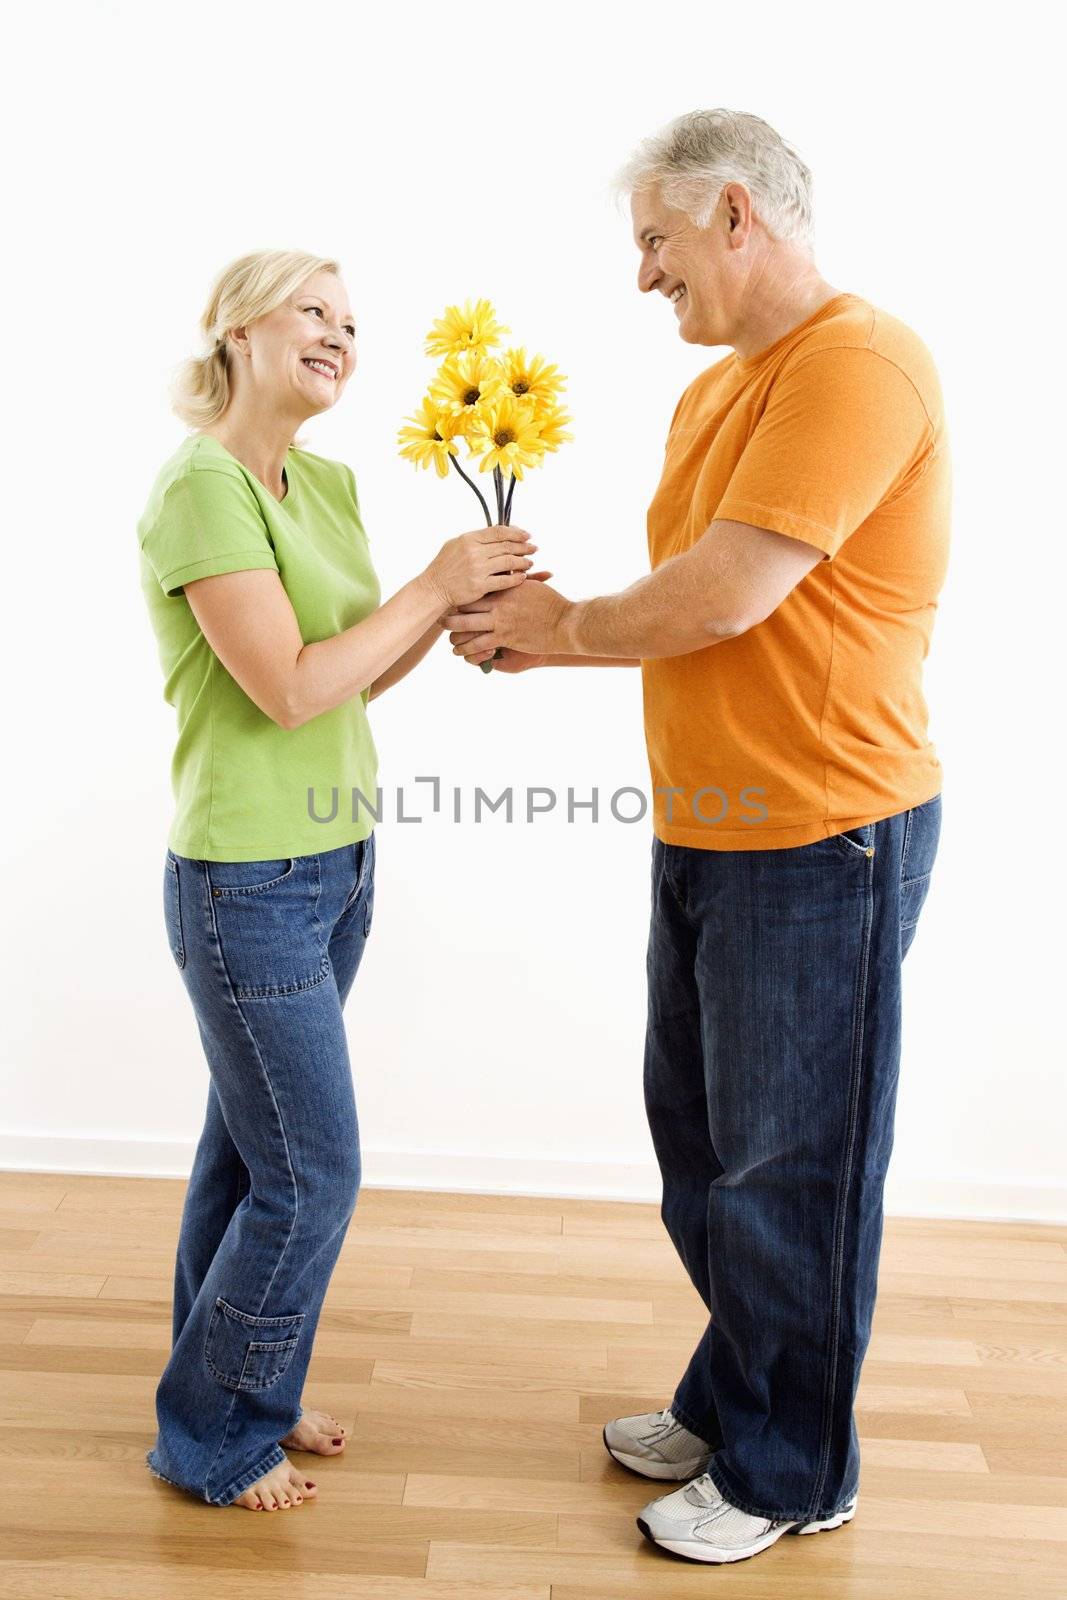 Man giving woman bouquet. by iofoto